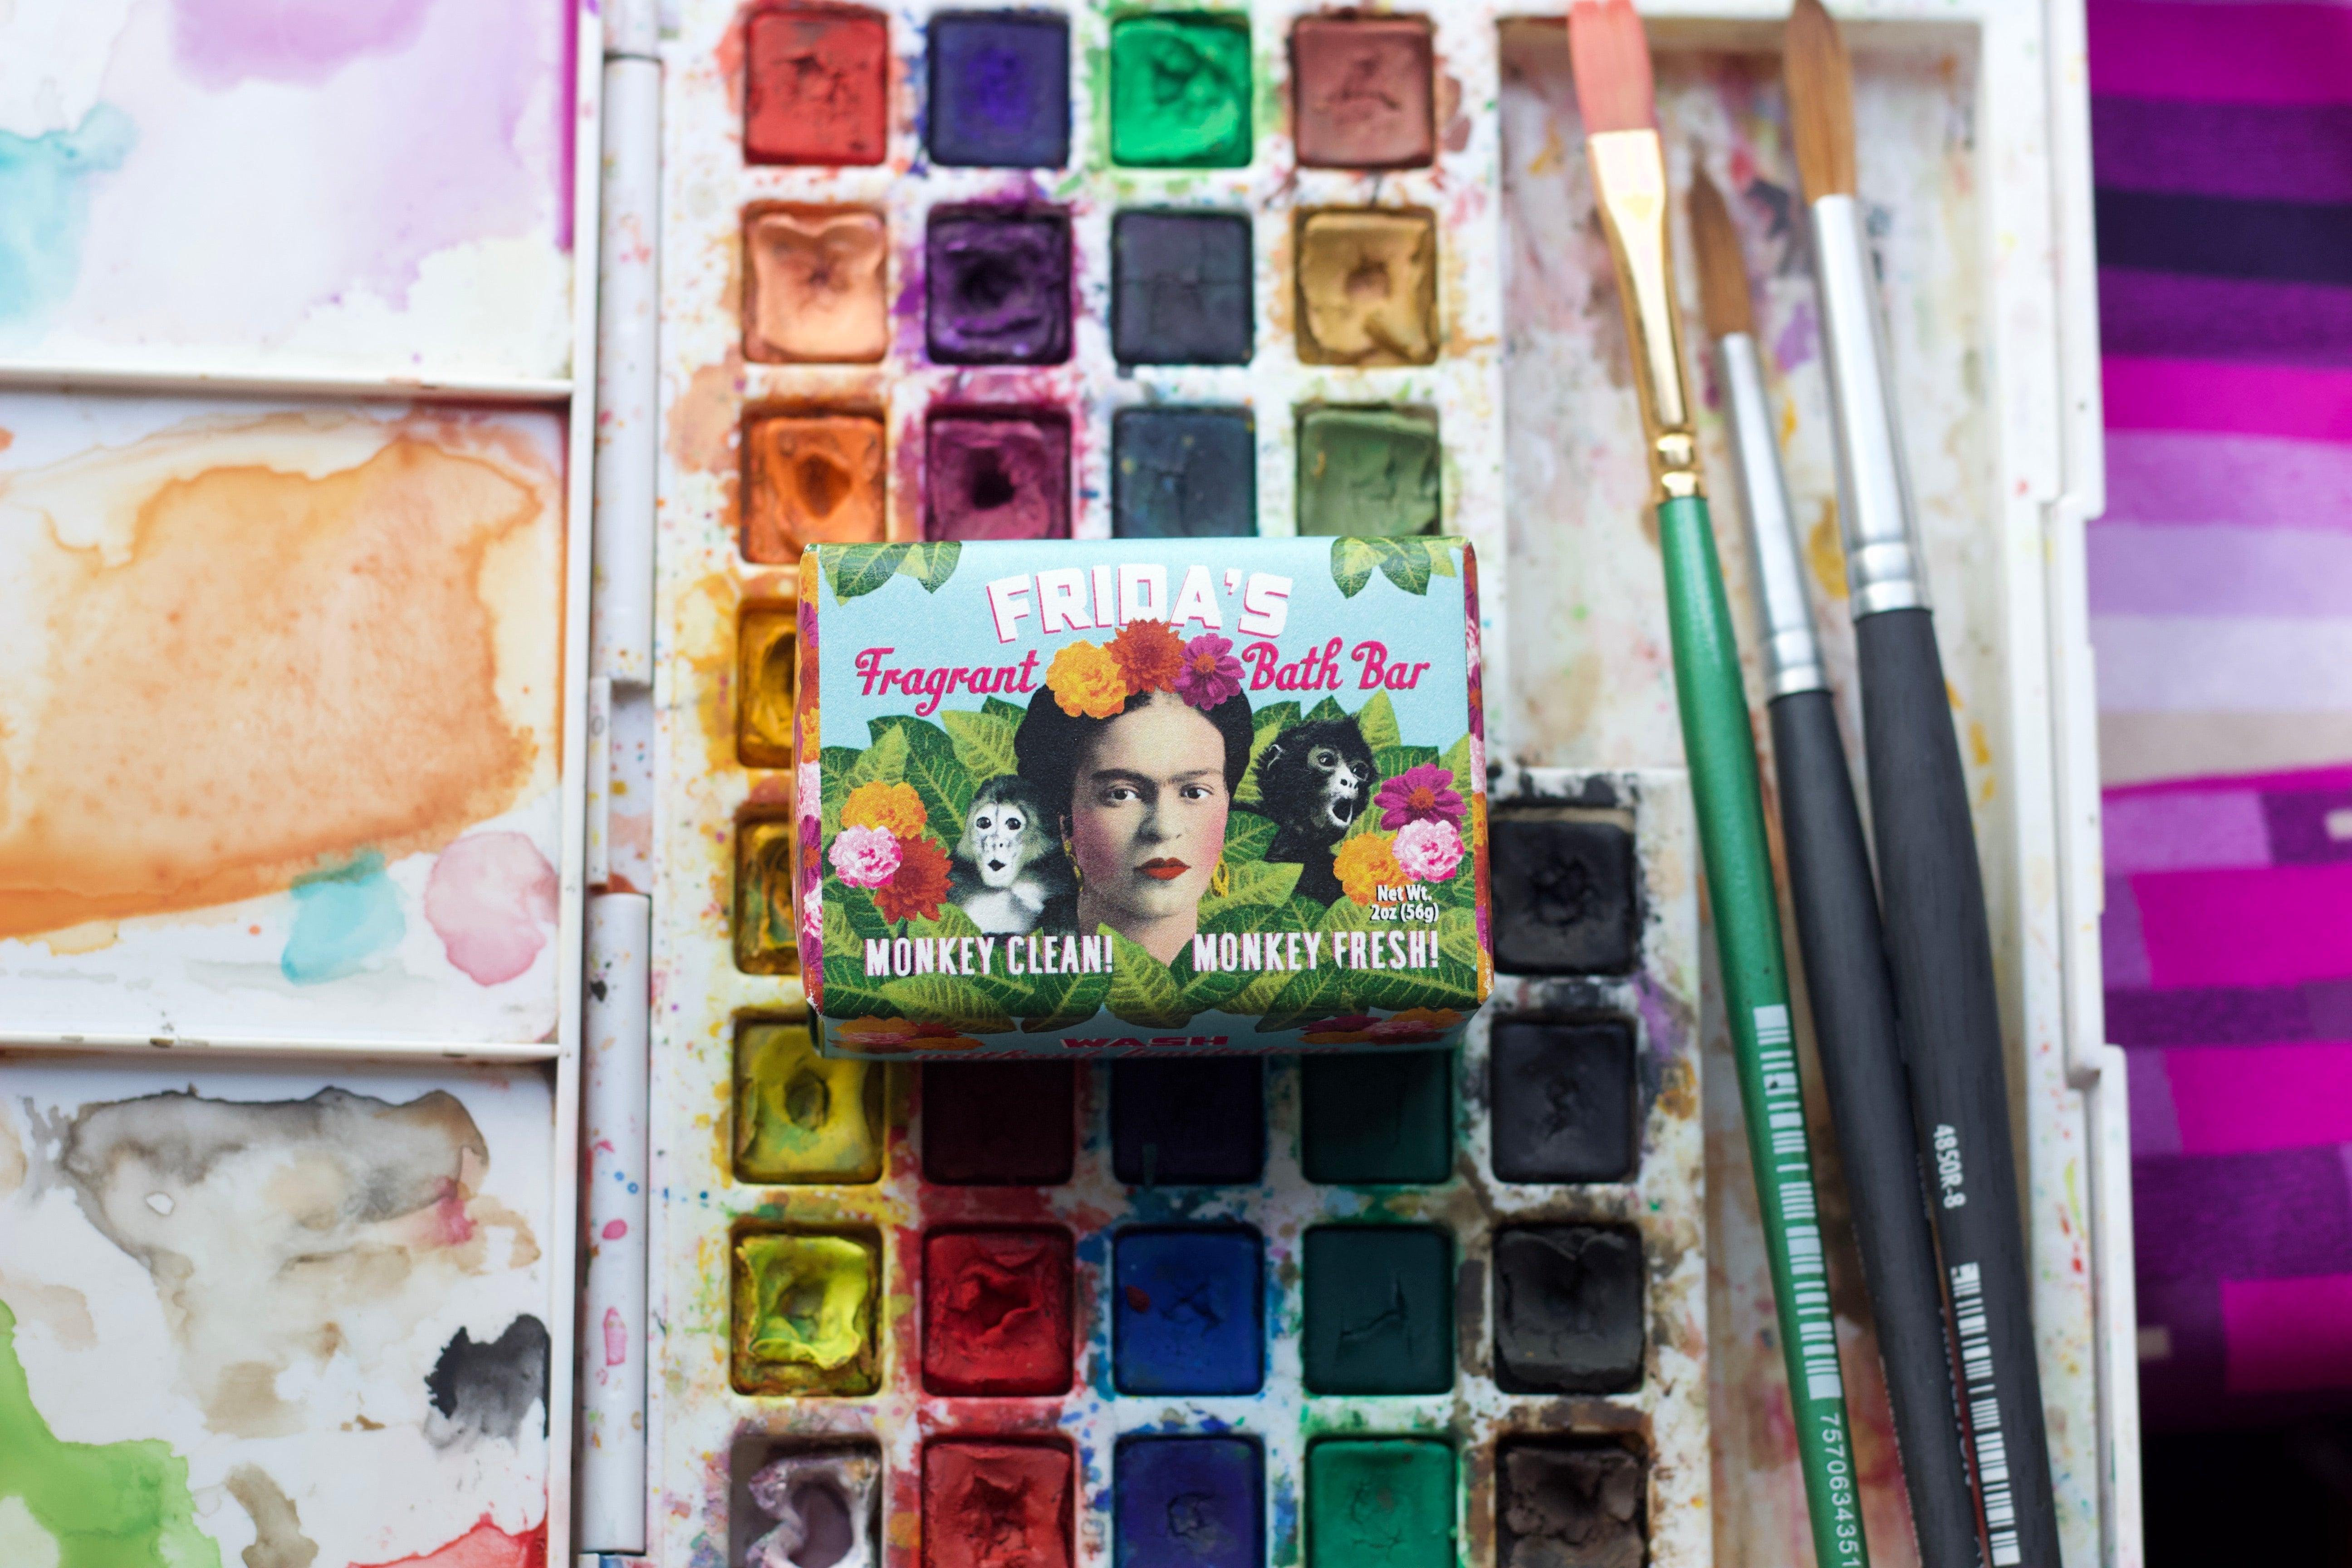 Product photo of Frida Kahlo Soap, a novelty gift manufactured by The Unemployed Philosophers Guild.